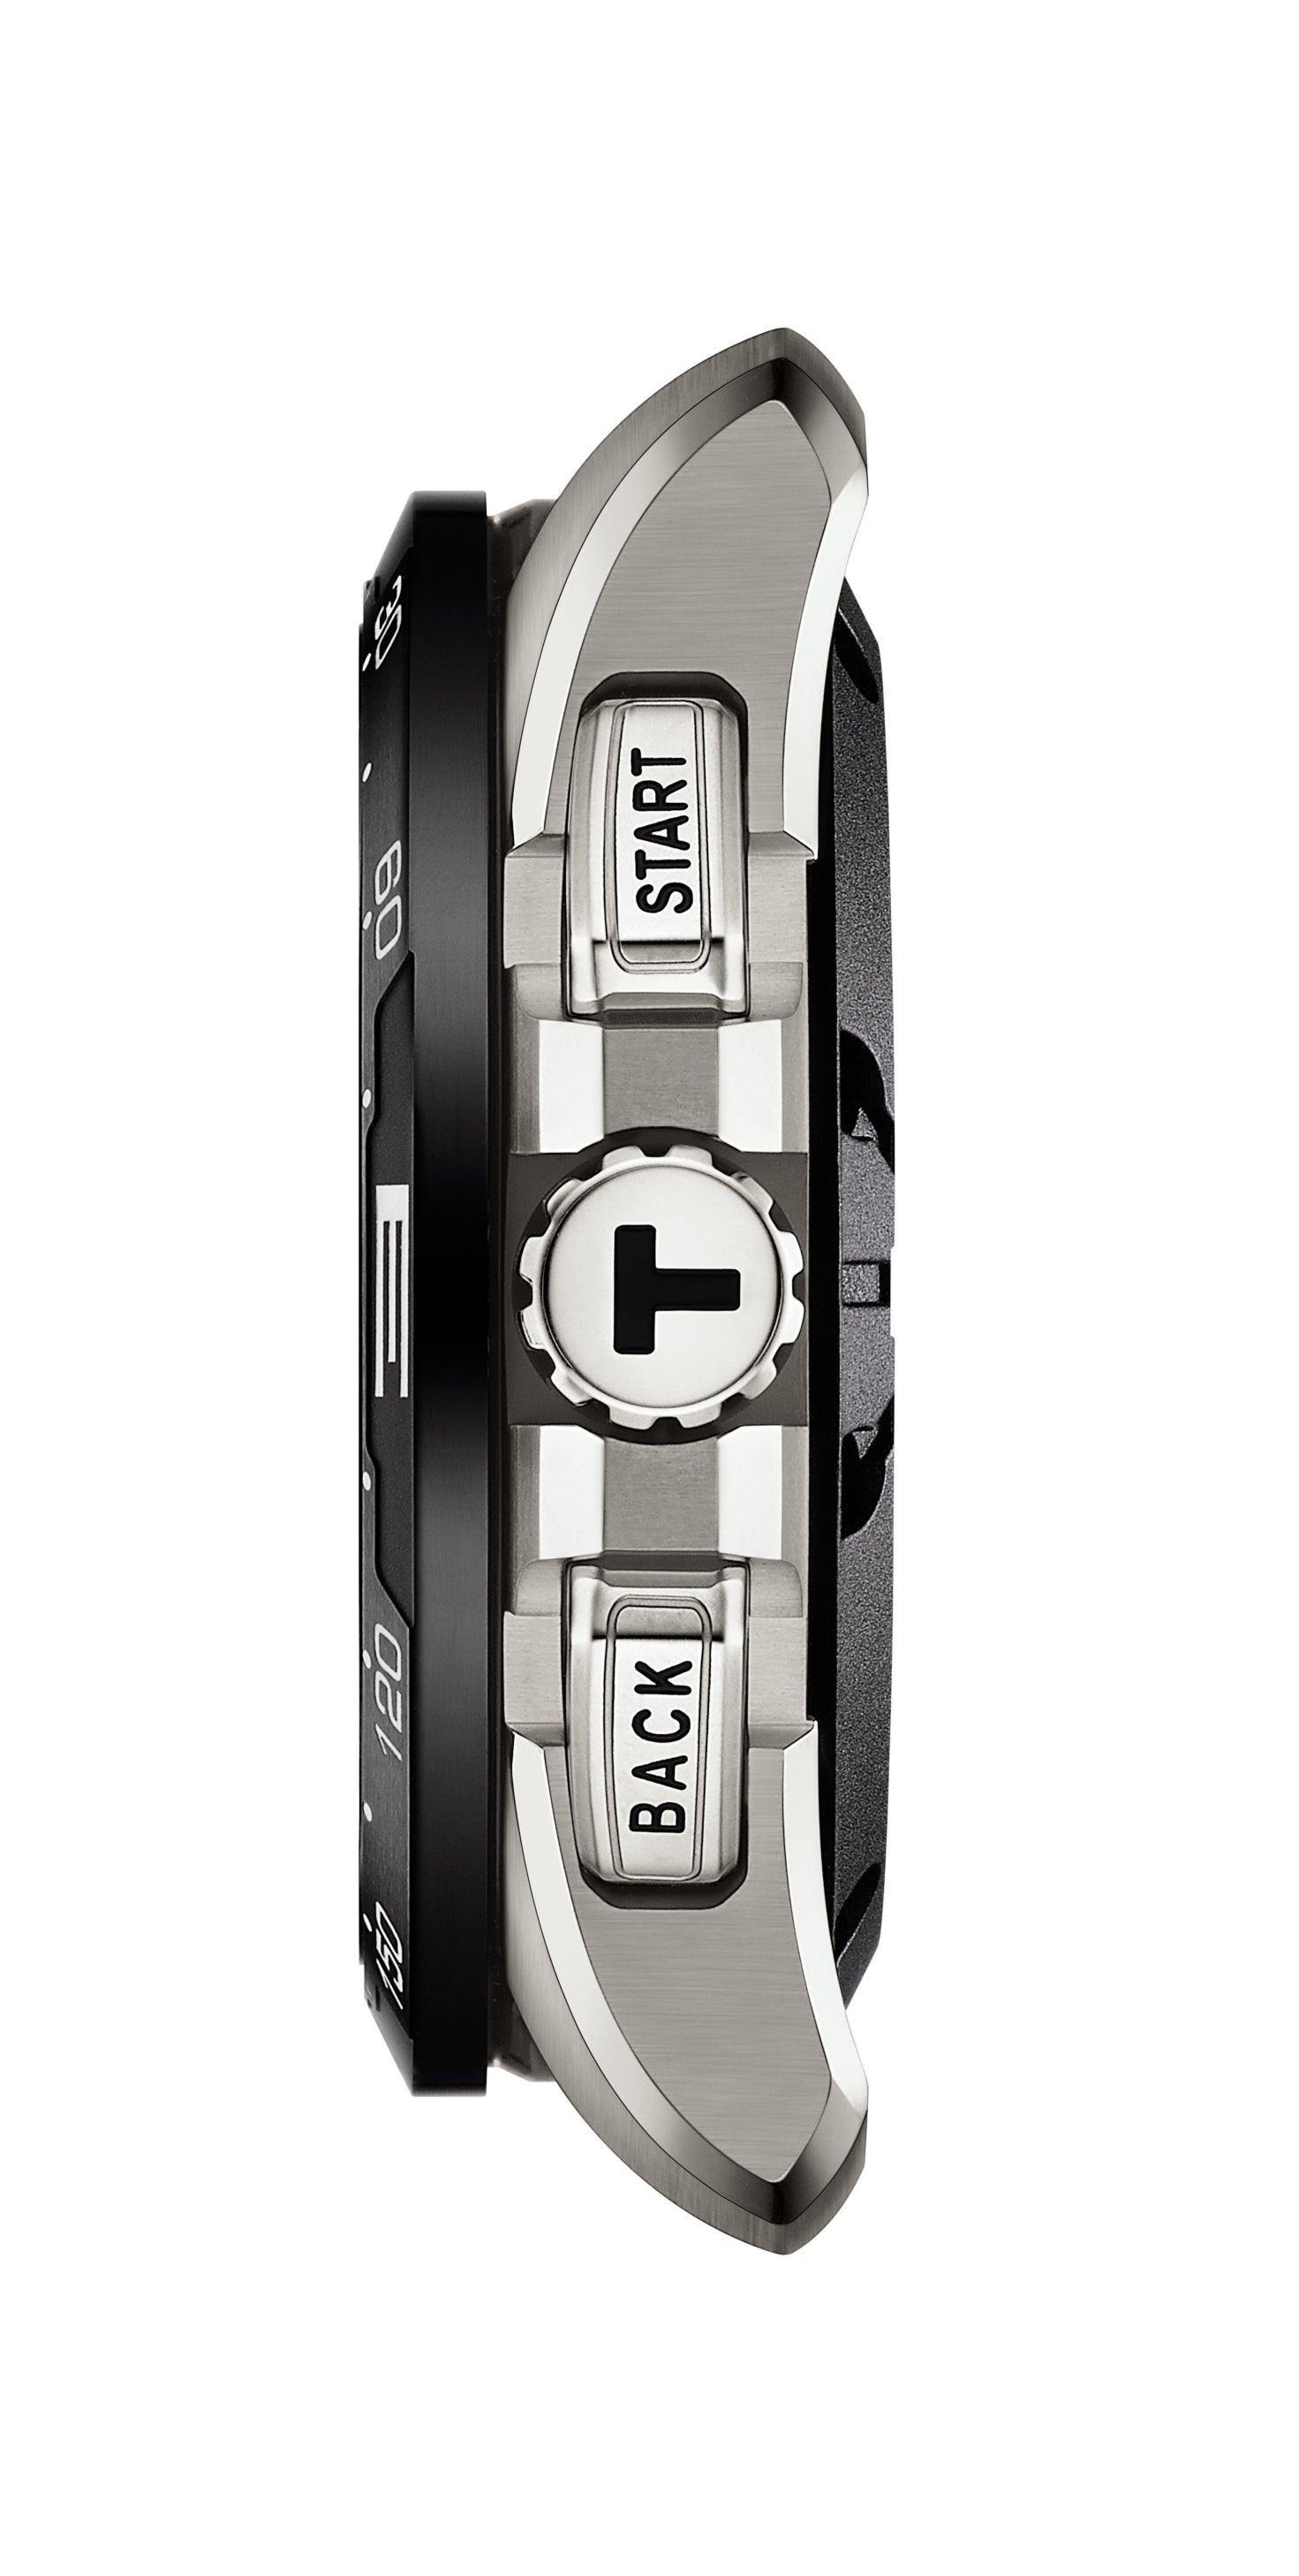 Tissot T-Touch T-Sport Men's 47.5mm Solar LCD Watch T121.420.47.051.00 - Wallace Bishop